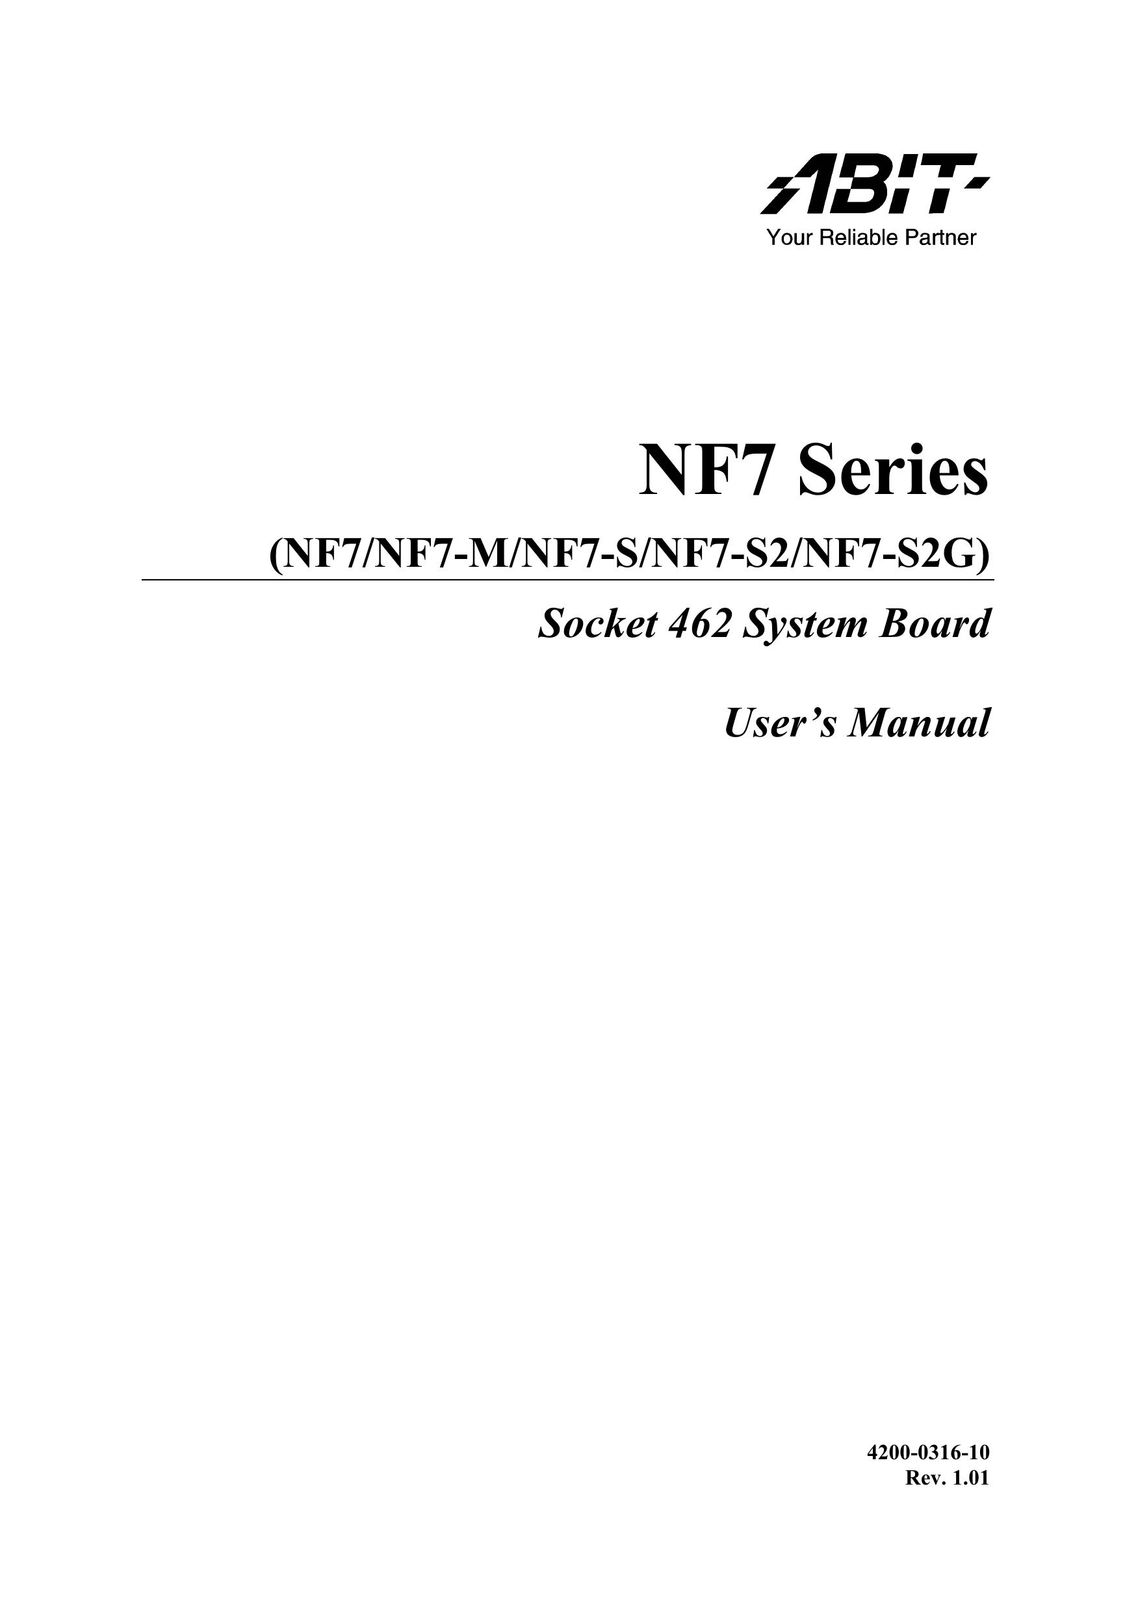 Abit NF7-S2G Computer Hardware User Manual